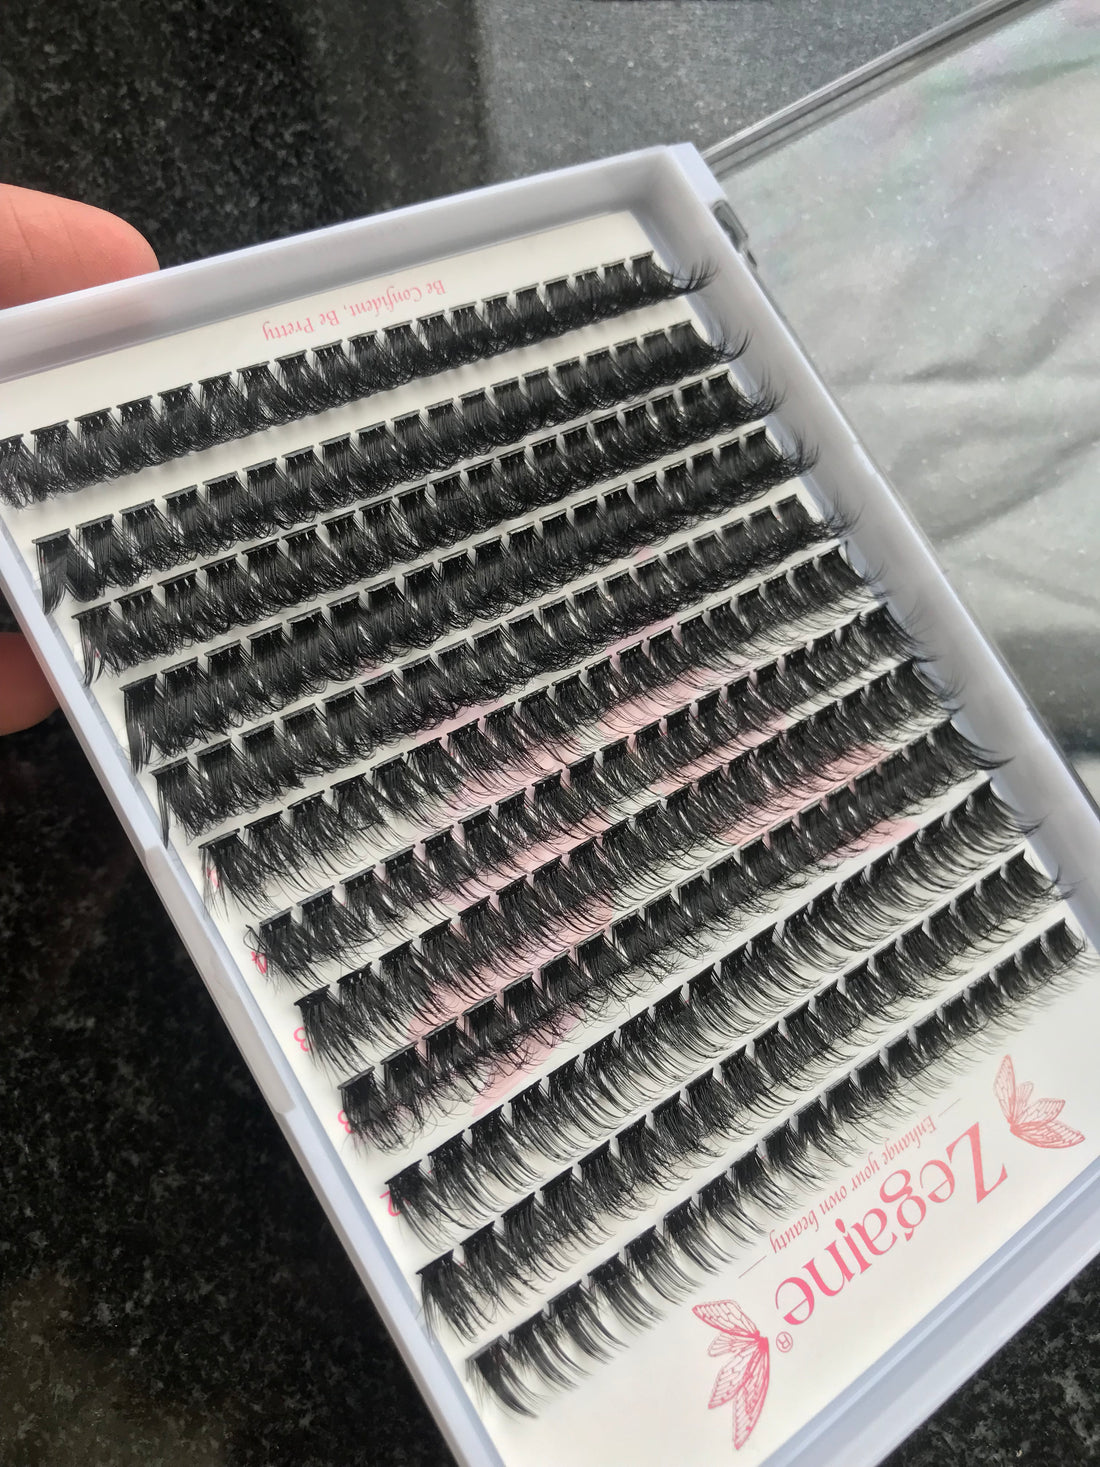 $10.7 for 3 trays lashes